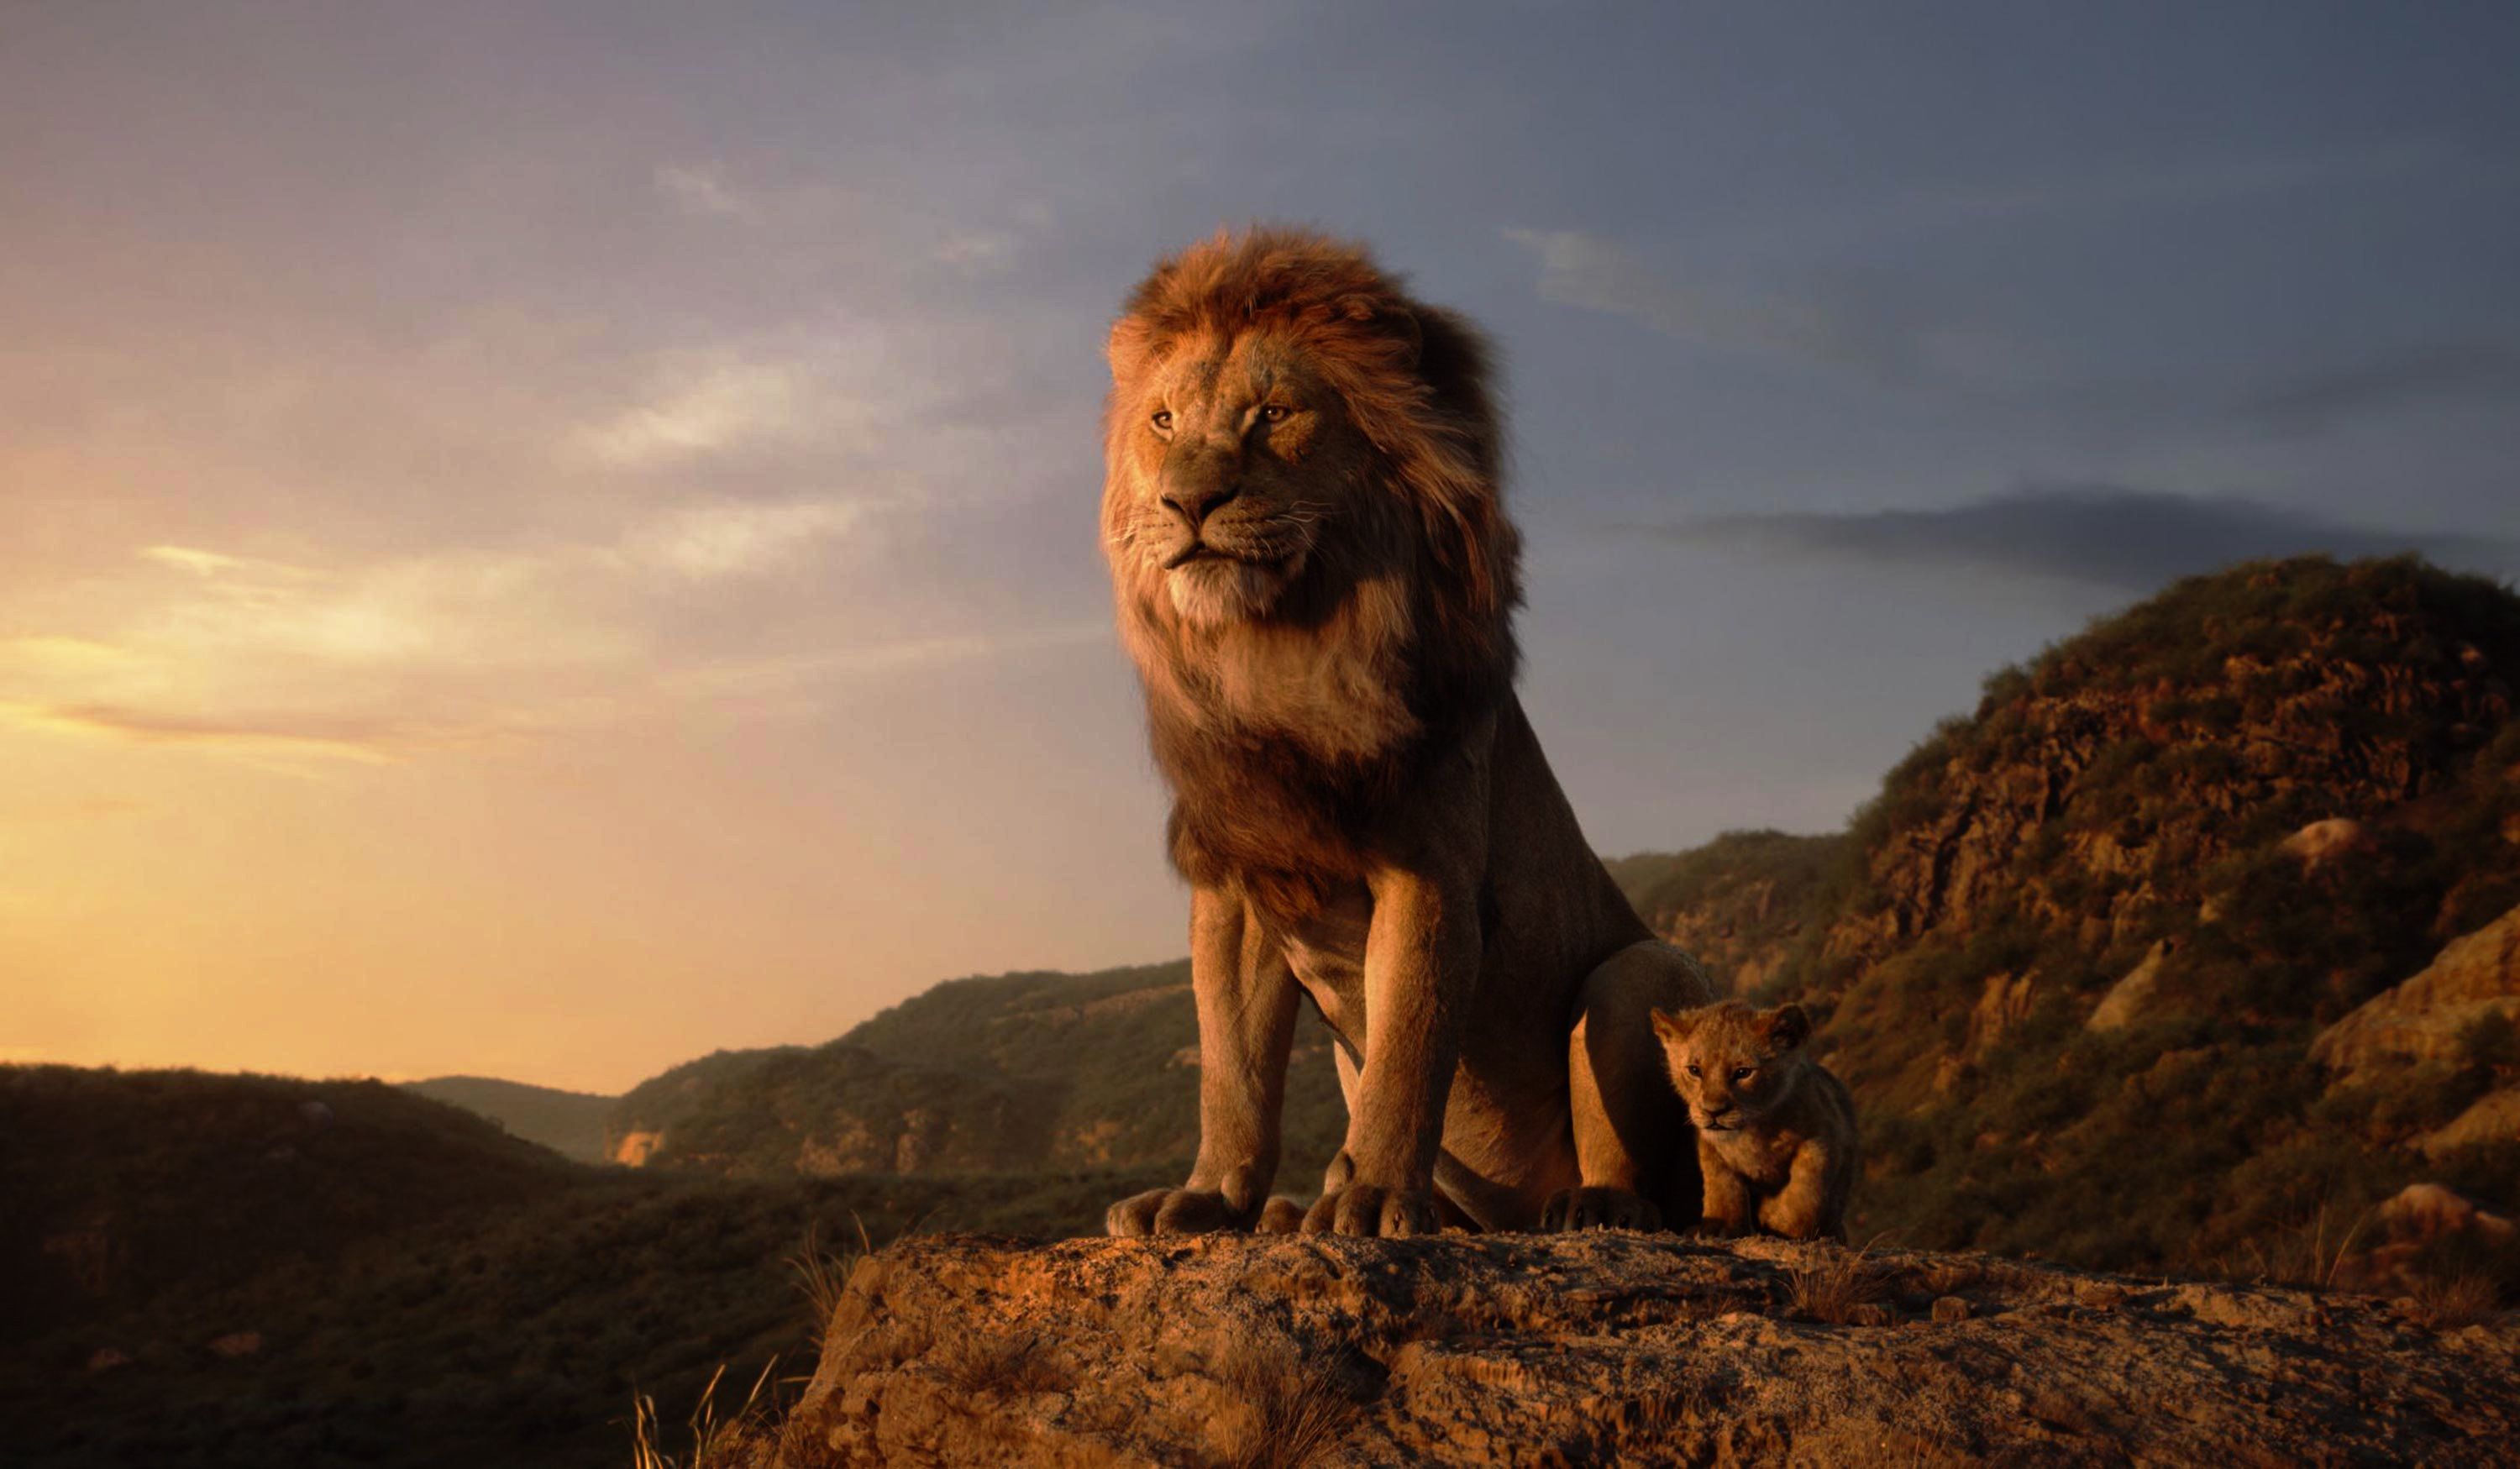 2048x1152 The Lion King 4k 2048x1152 Resolution HD 4k Wallpapers, Image, Backgrounds, Photos and Pictures